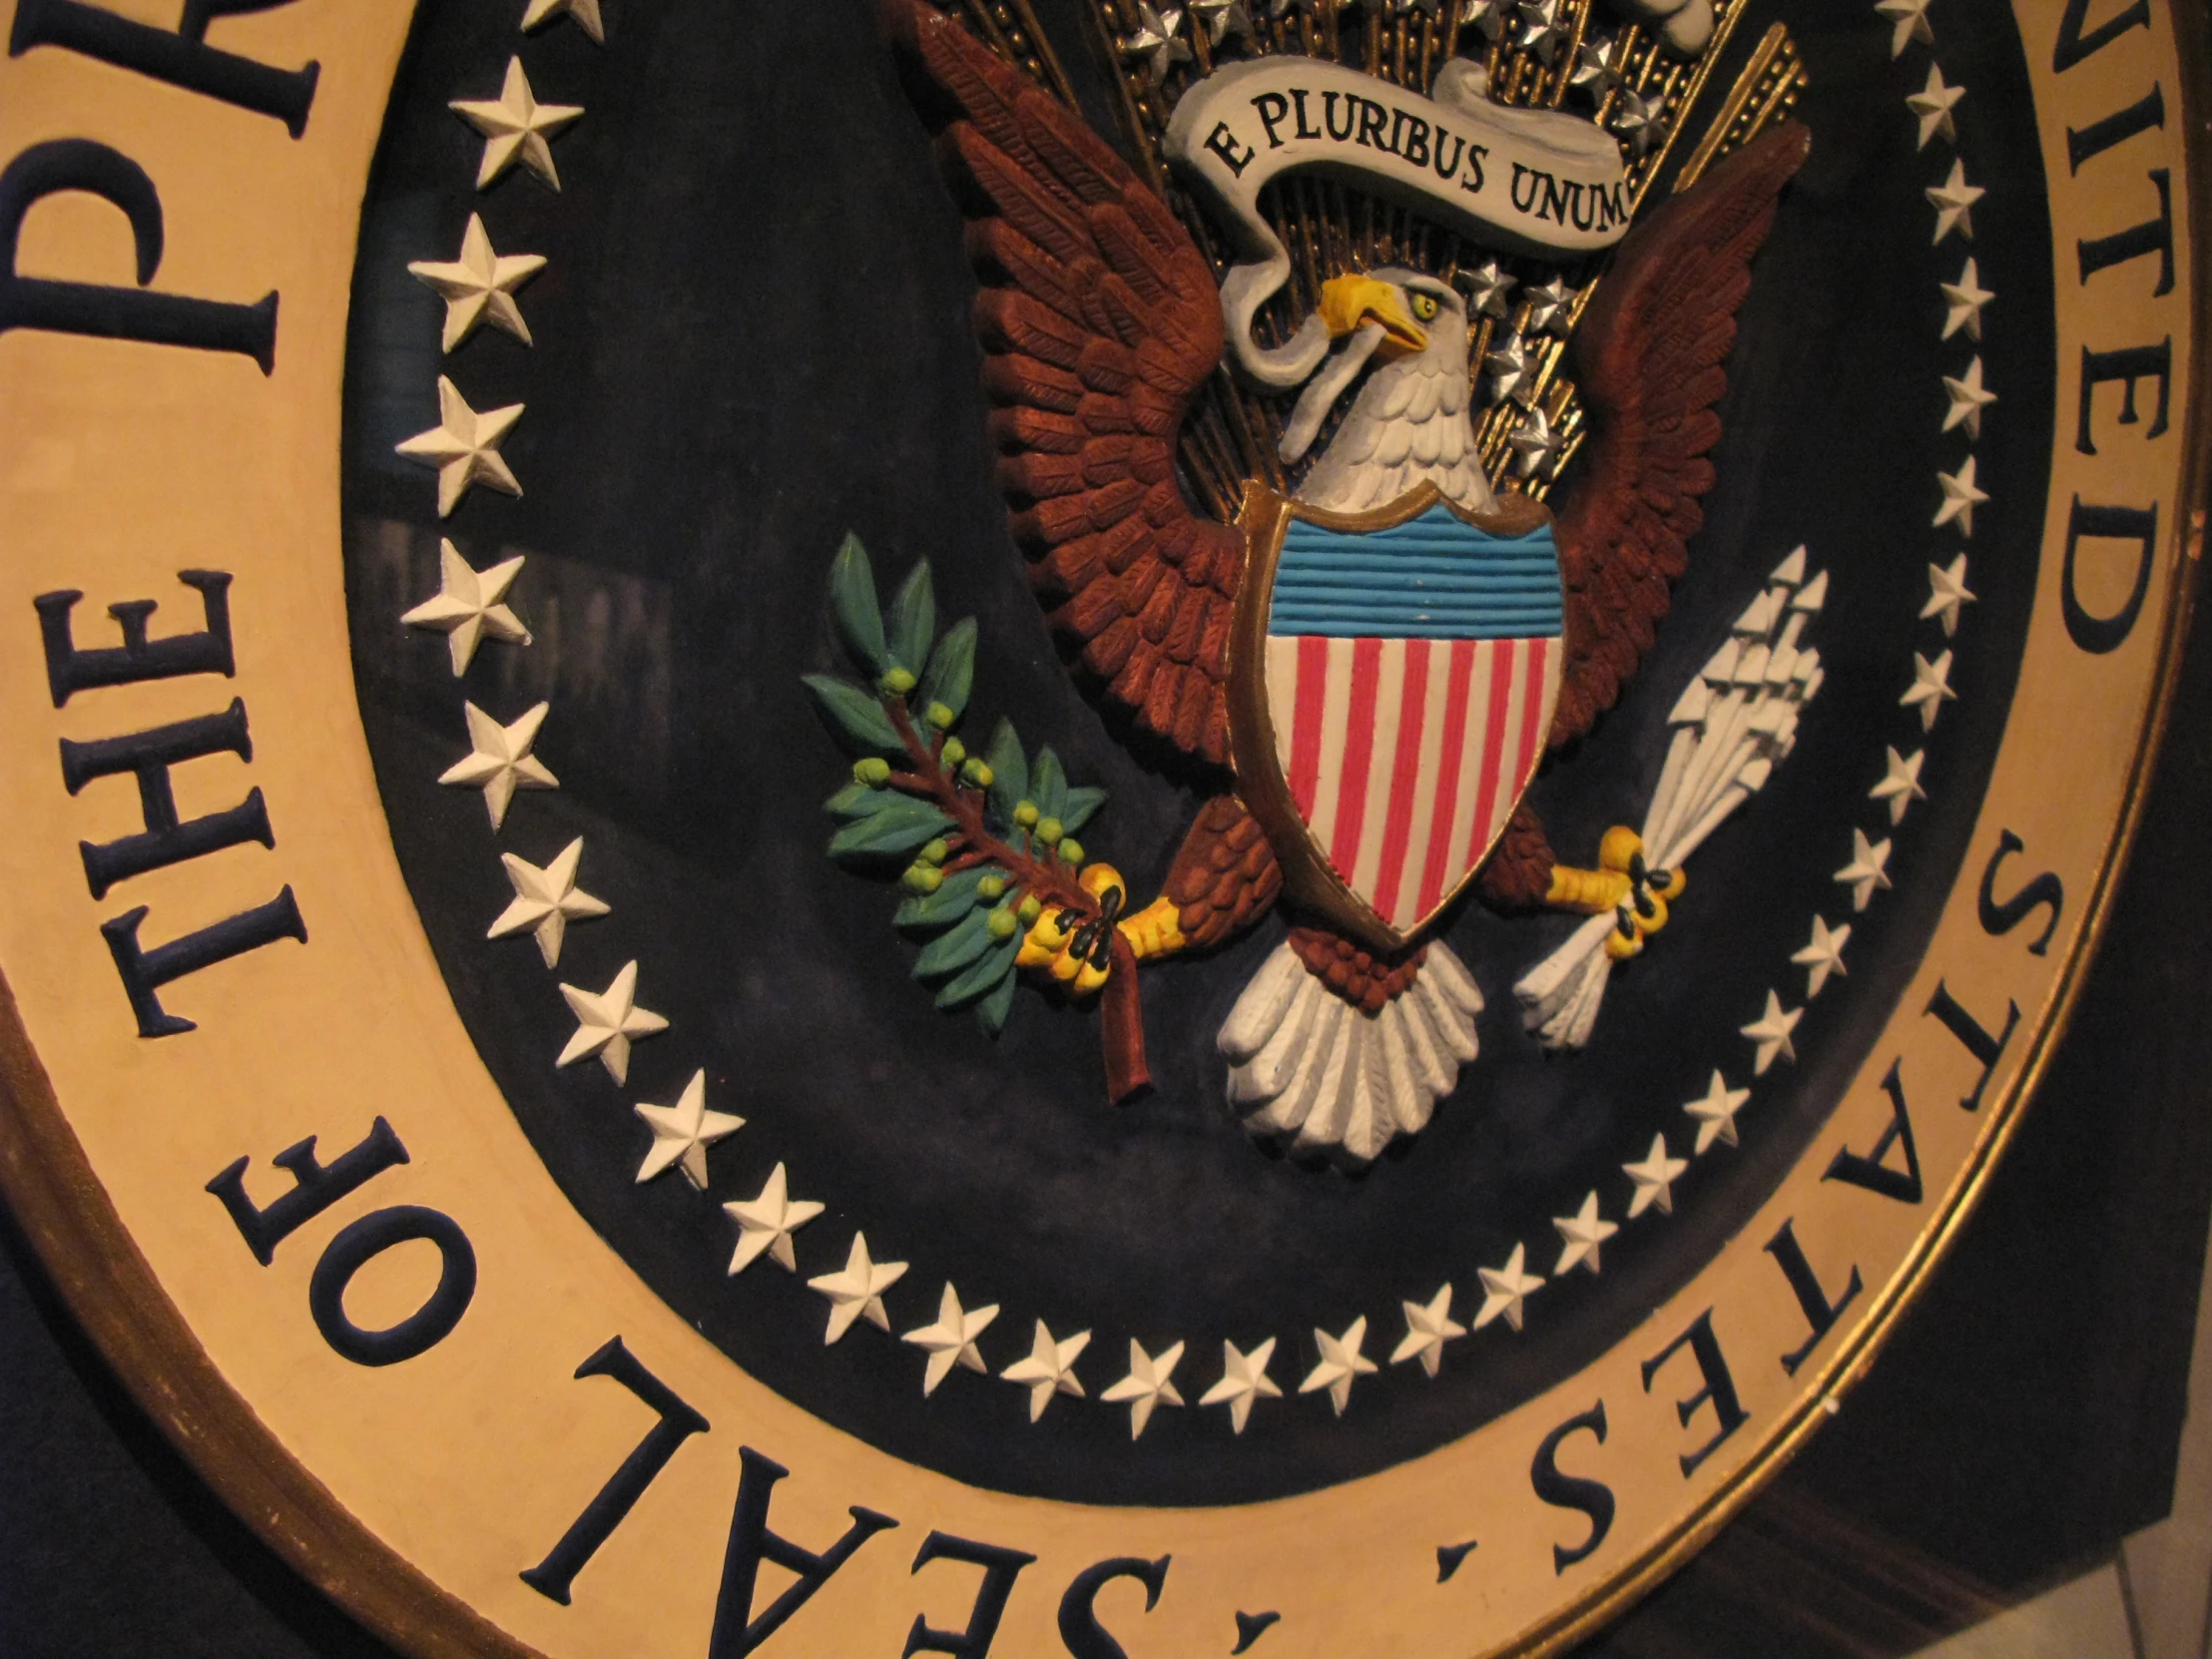 the department of justice logo on the wall in a building